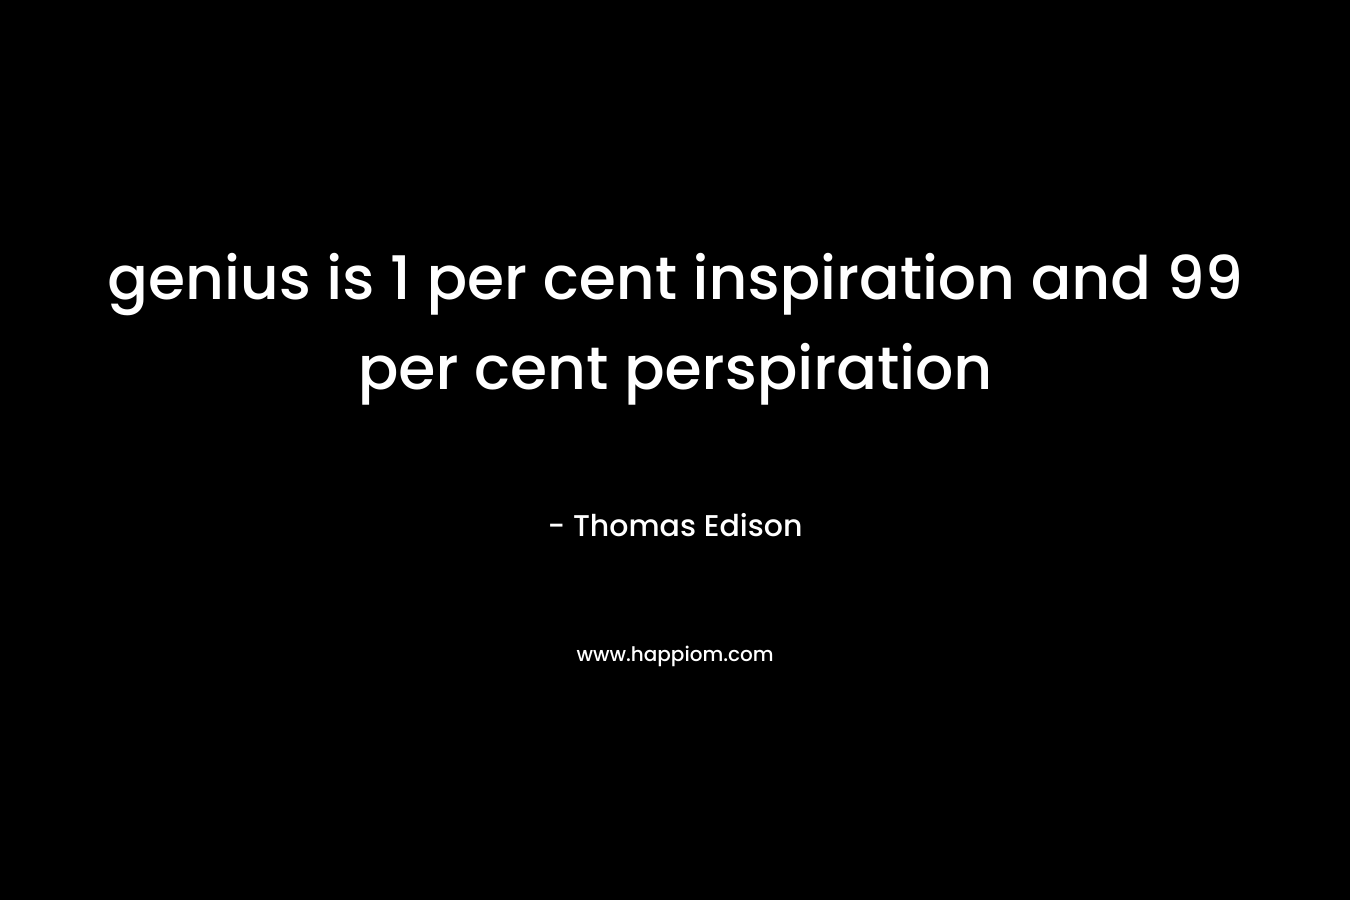 genius is 1 per cent inspiration and 99 per cent perspiration